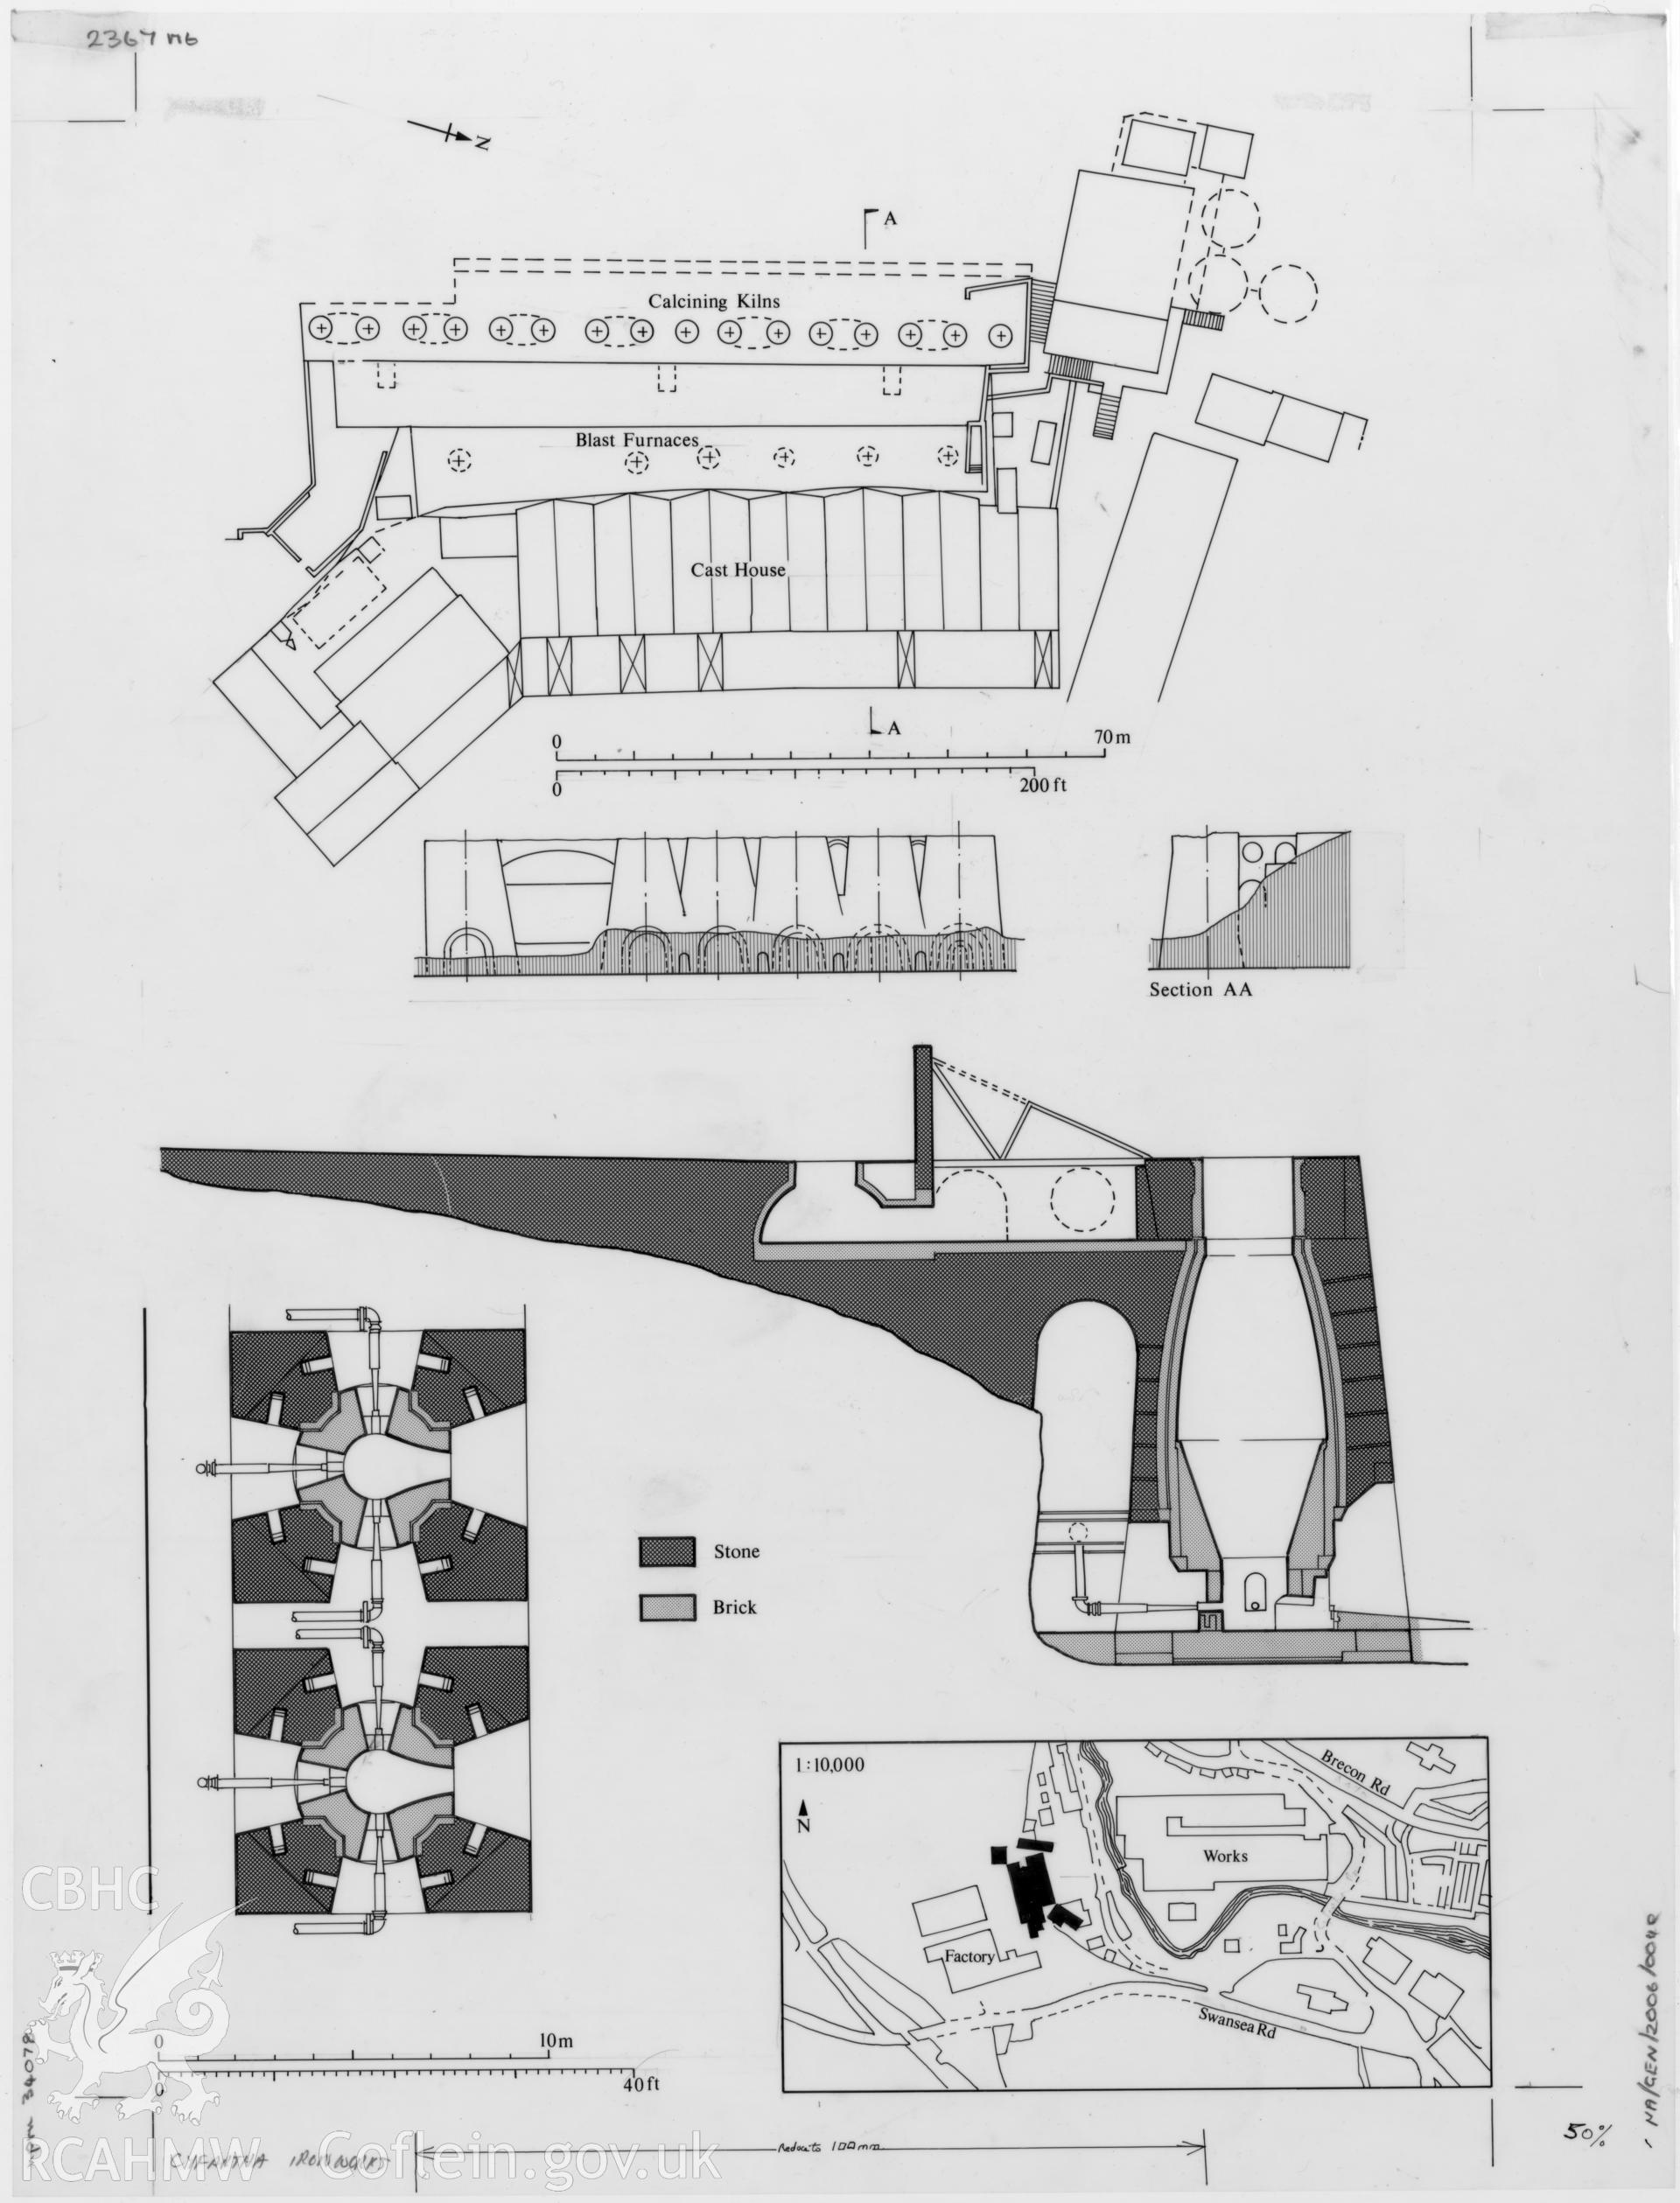 Digital copy of measured plans and section views of Cyfarthfa Works, produced by Geoff Ward in 1992 for Council for British Archaeology and published in the CBA Research Report 79, fig 36